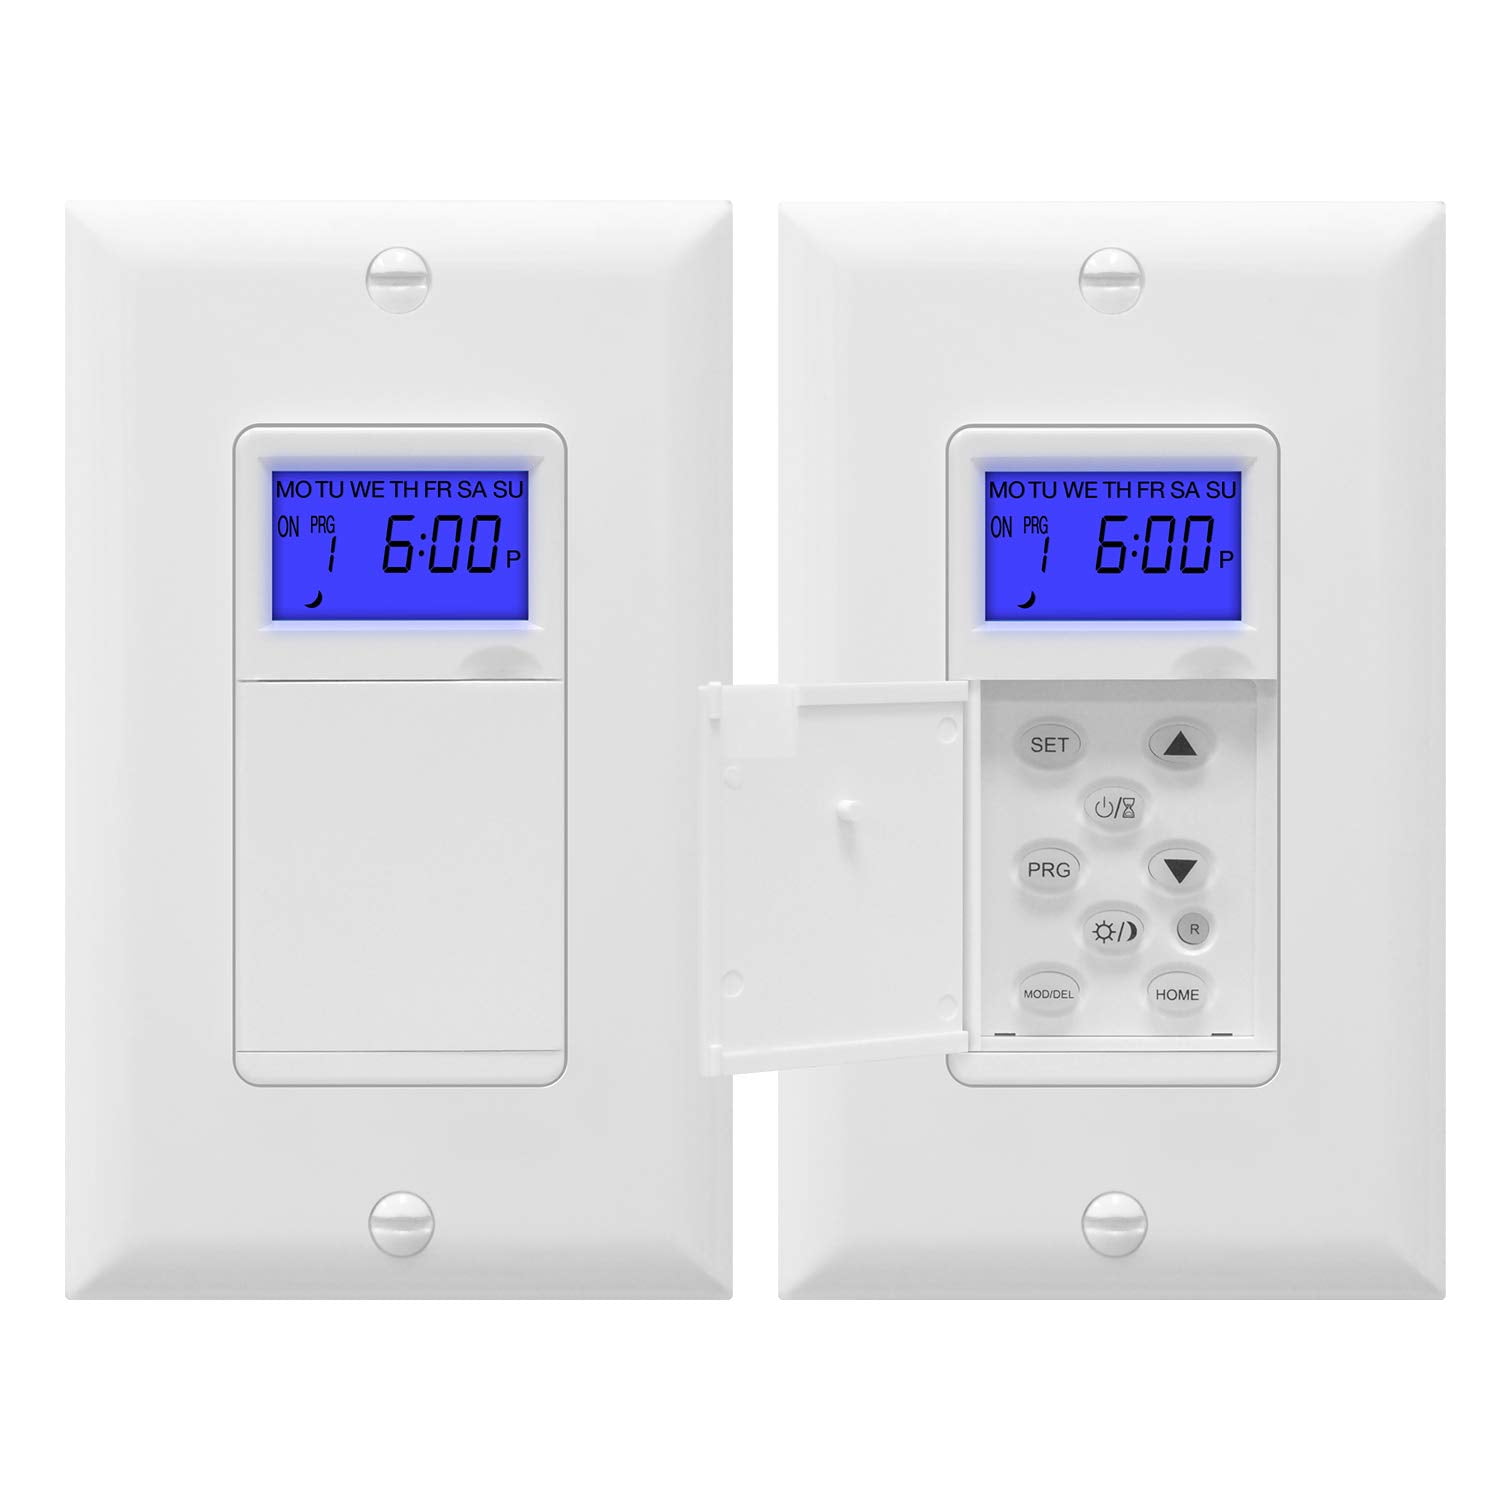 2 UL Timer White, Listed, TOPGREENER Switch, Sunrise in Pack timer Neutral Sunset for Single-Pole Motors, Lights, Fans, Wire Wall 7-Day Digital and 3-Way, or Programmable Required, TGT01-H, Astronomic